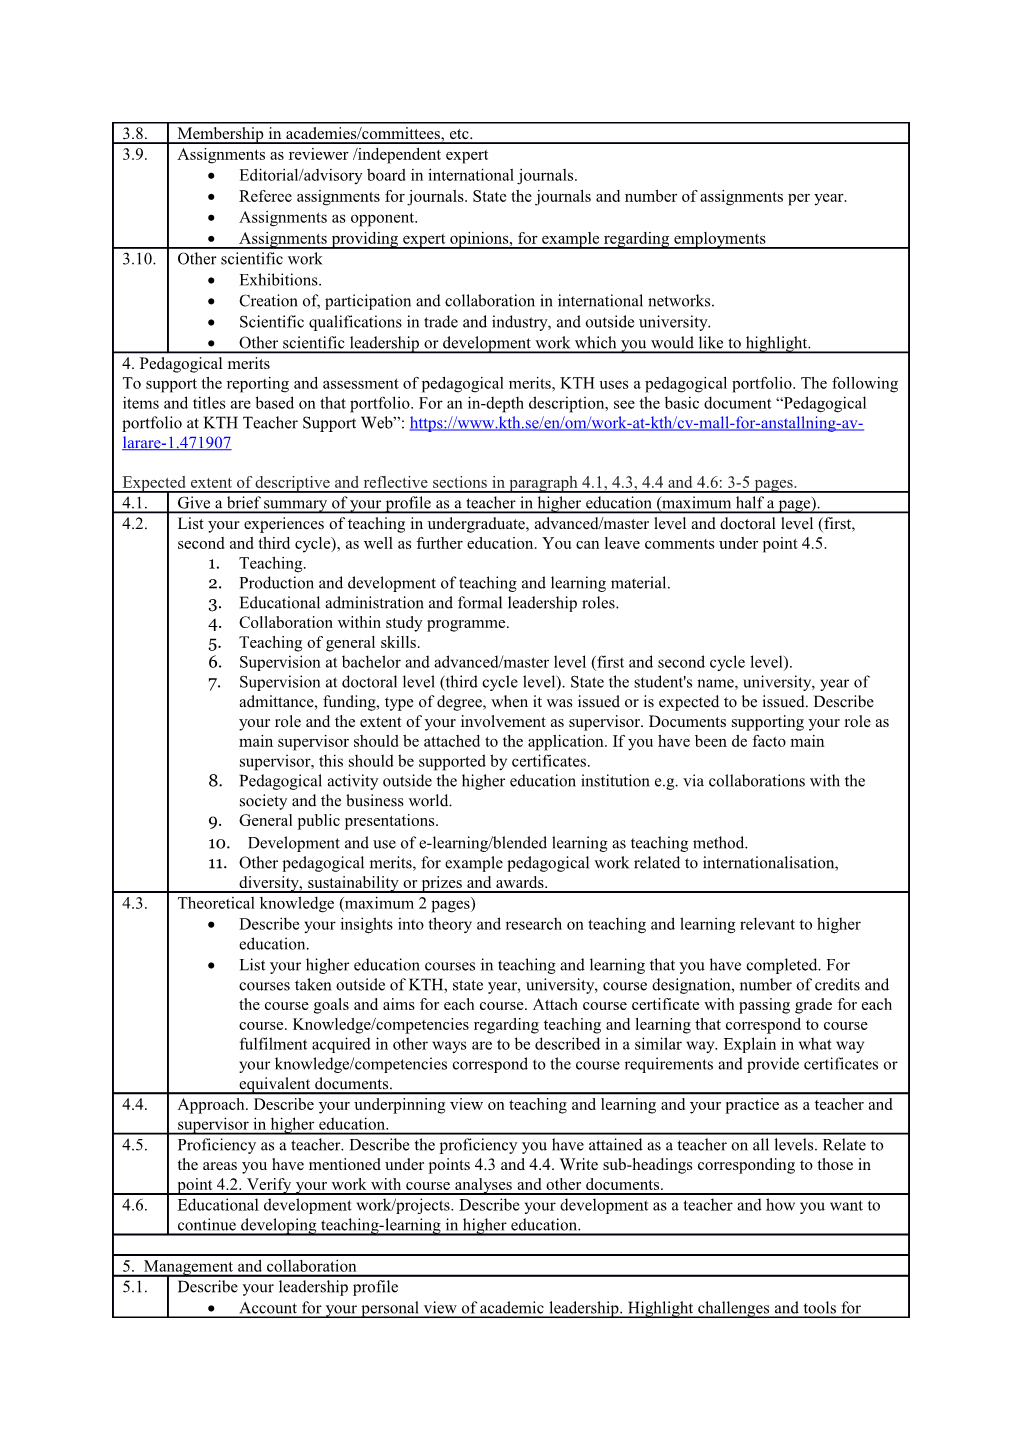 CV Template for the Employment and Promotion of Teachers